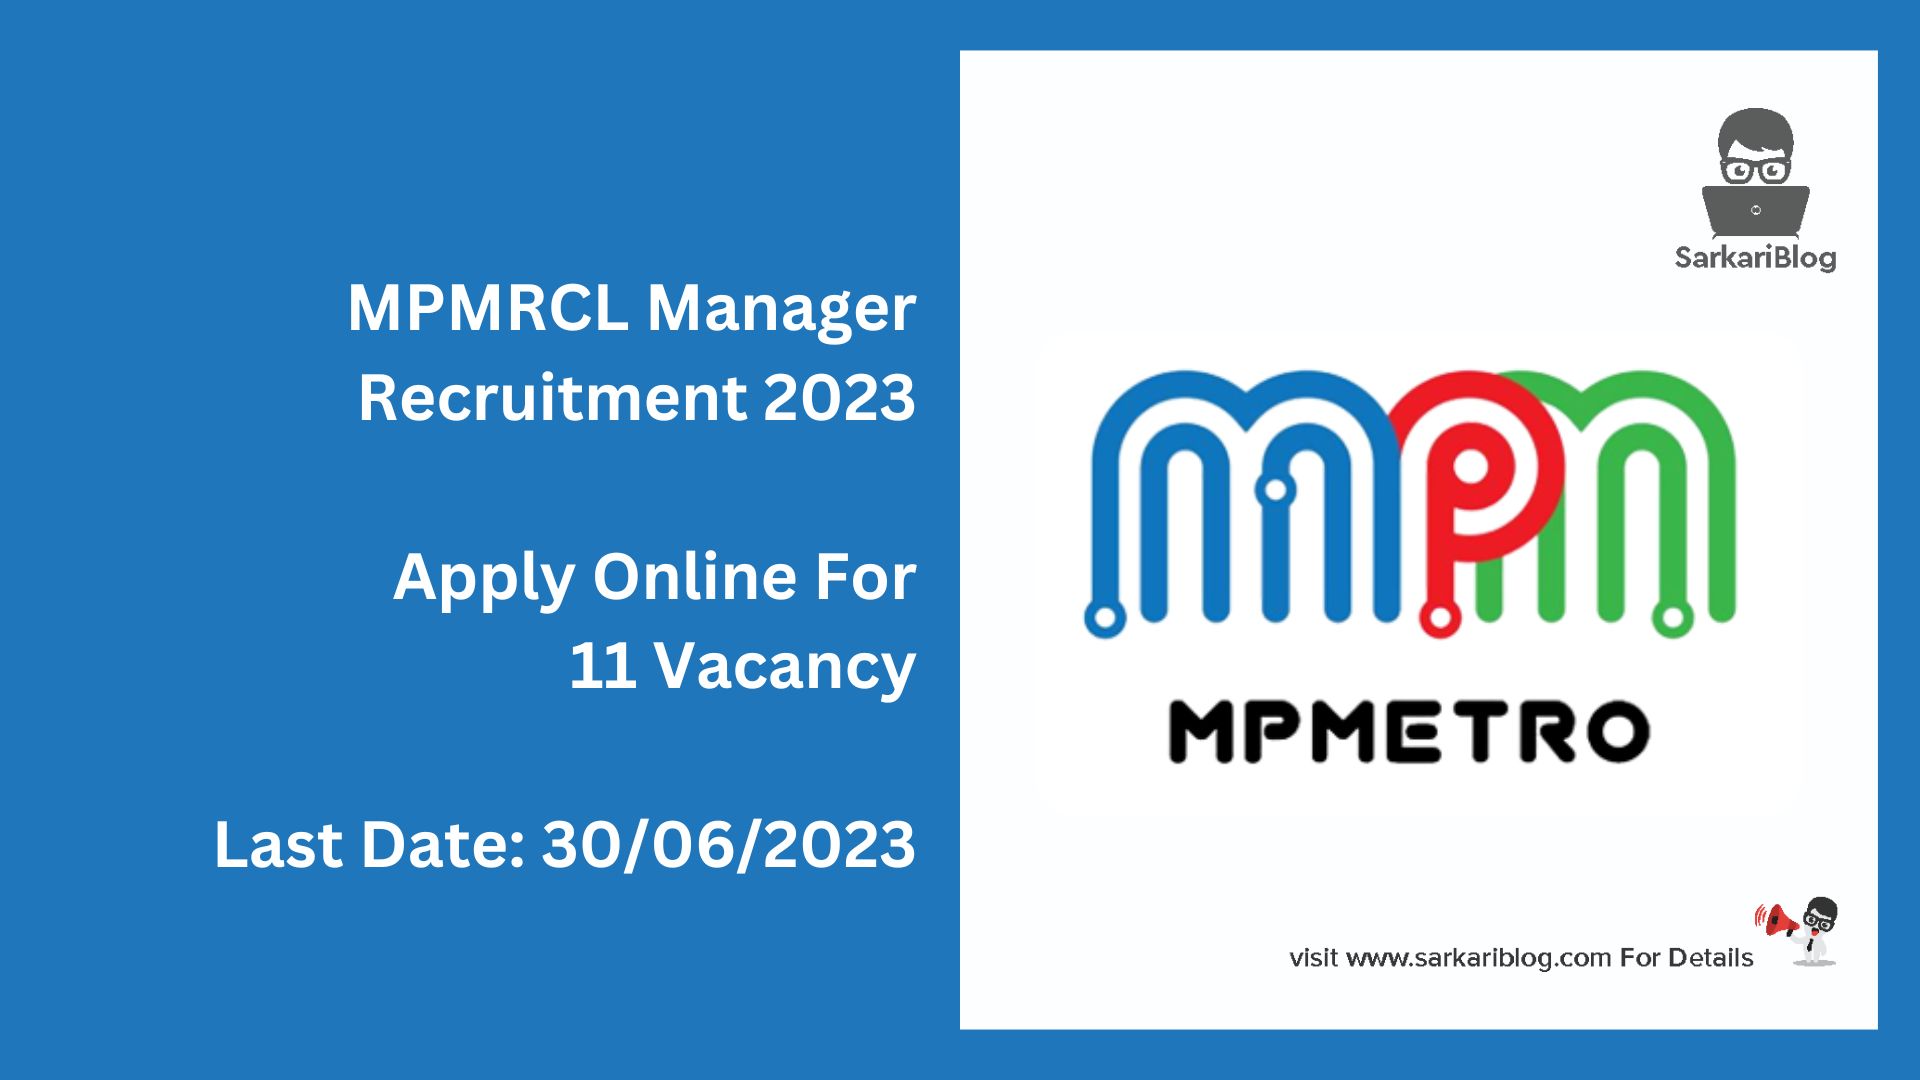 MPMRCL Manager Recruitment 2023